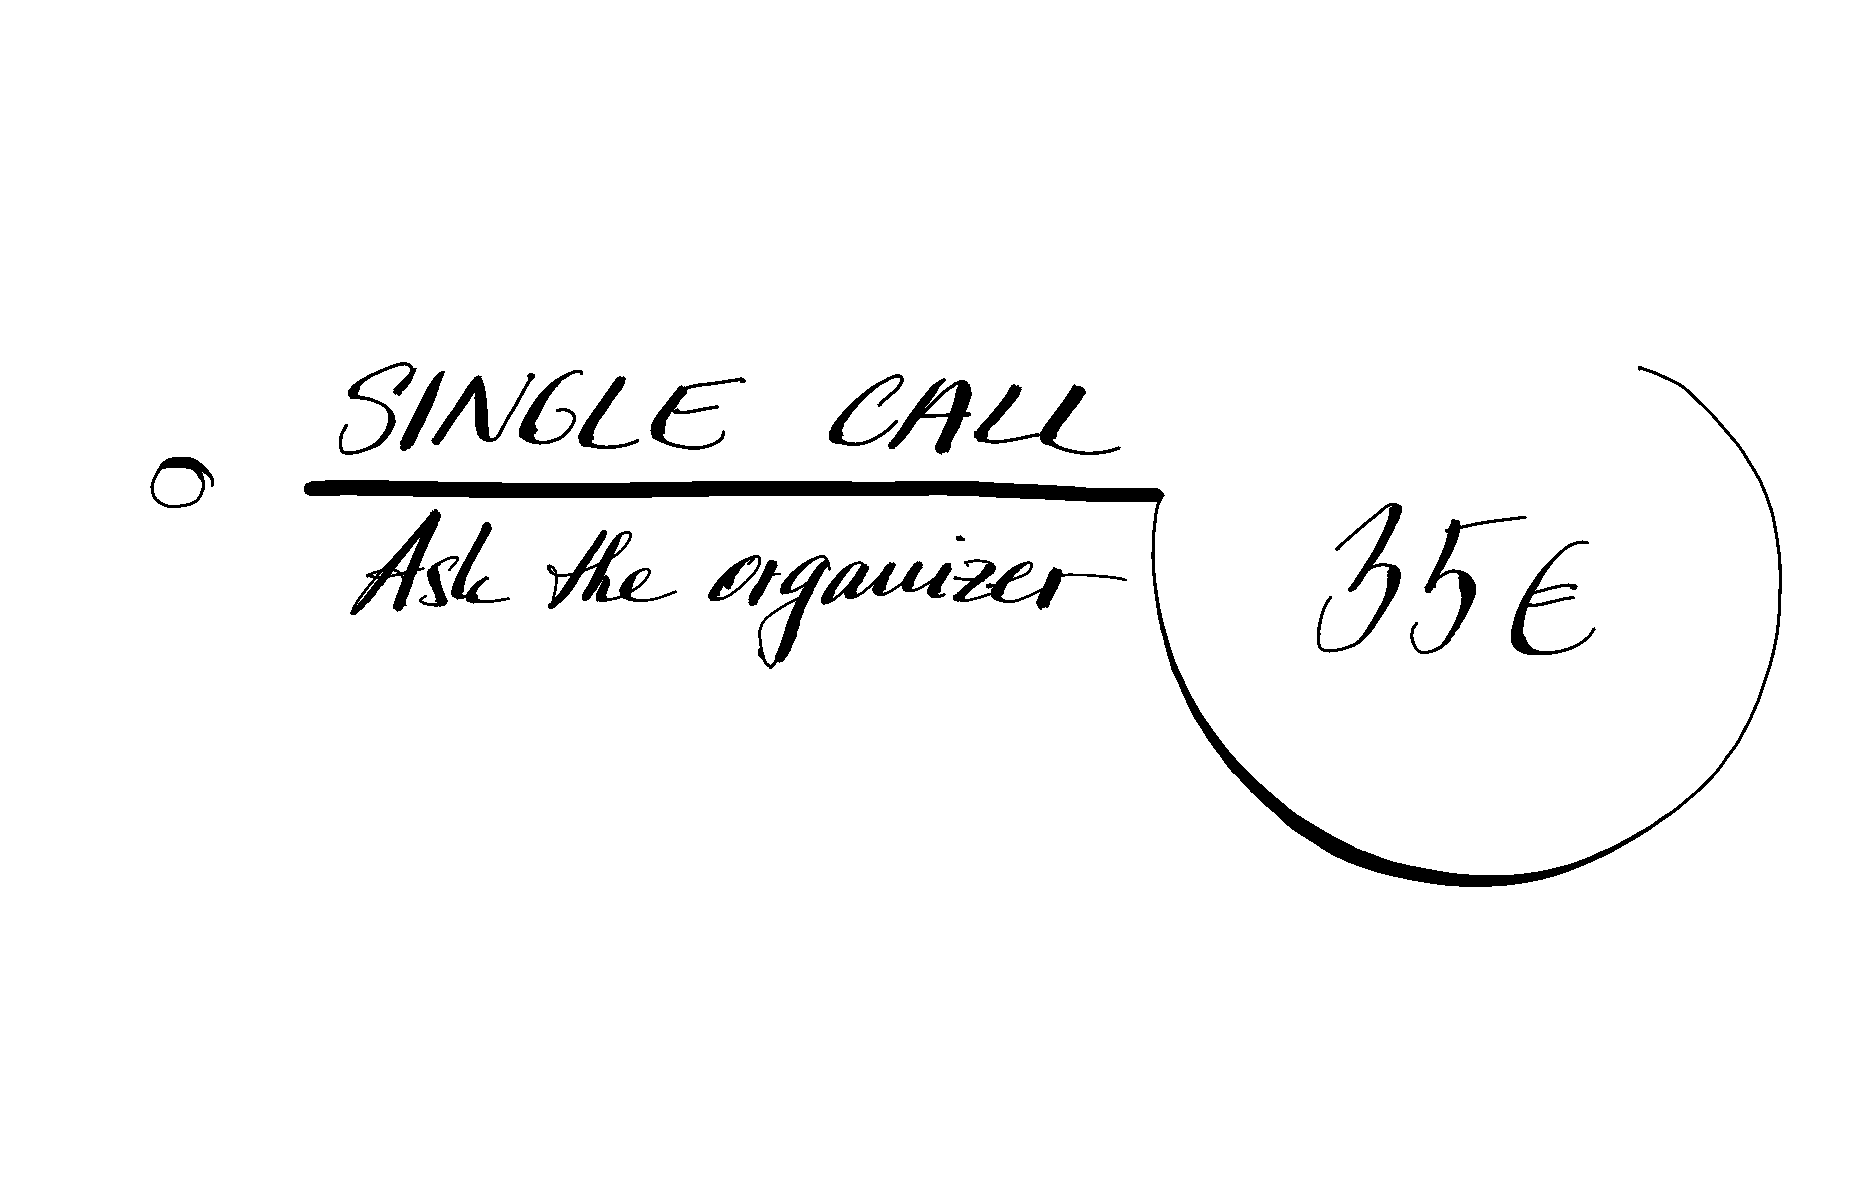 Sinle call - Ask the organizer